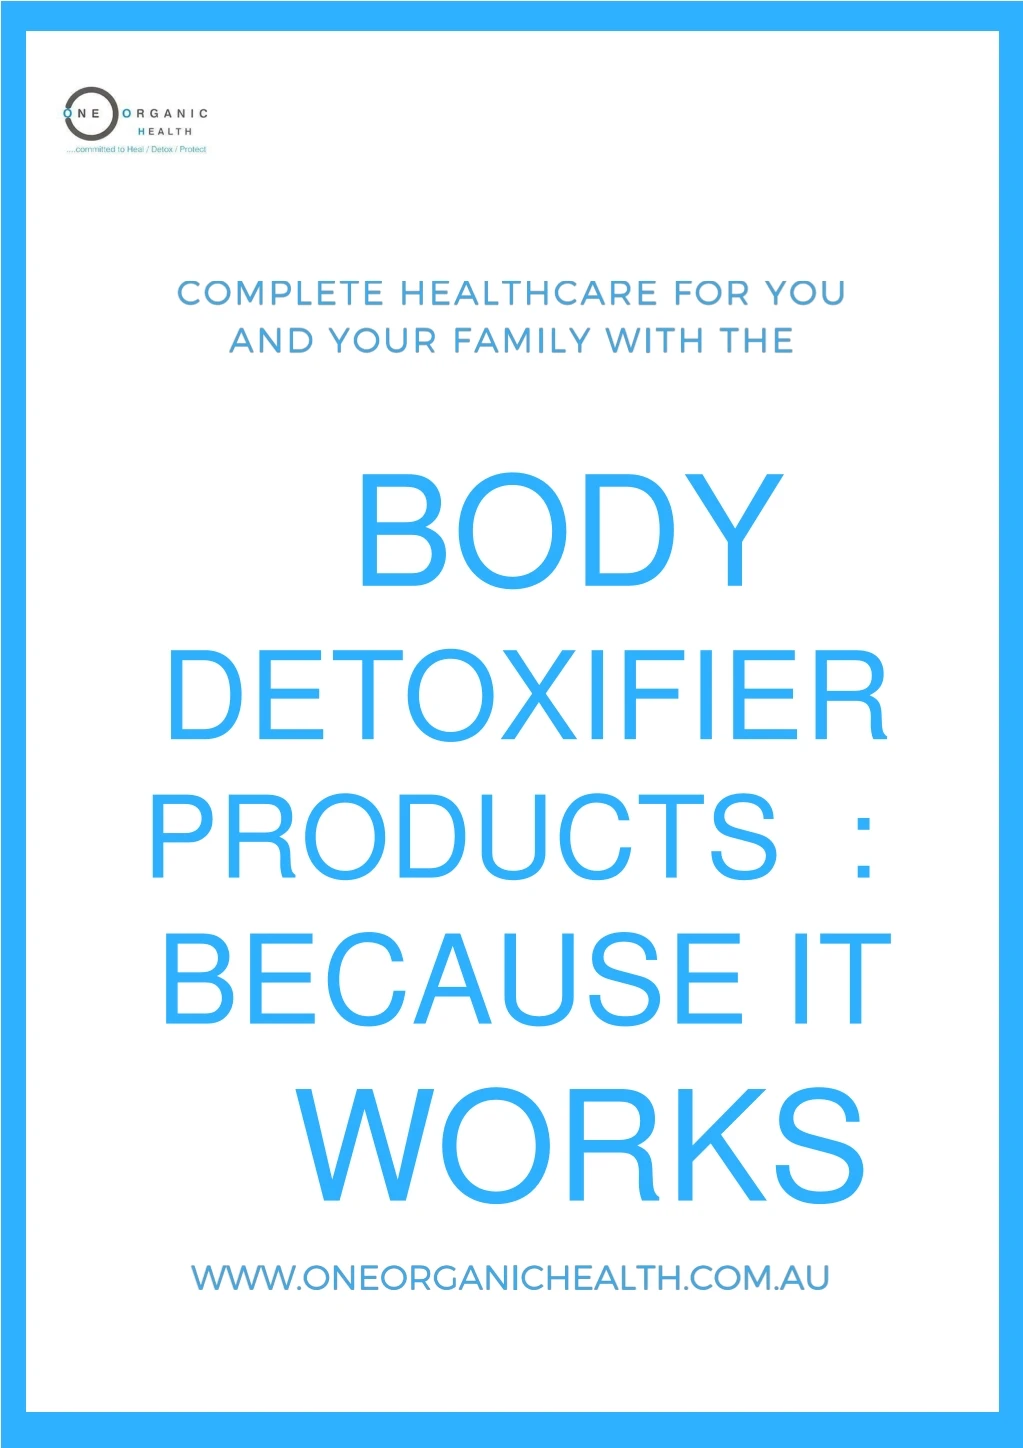 body detoxifier products because it works